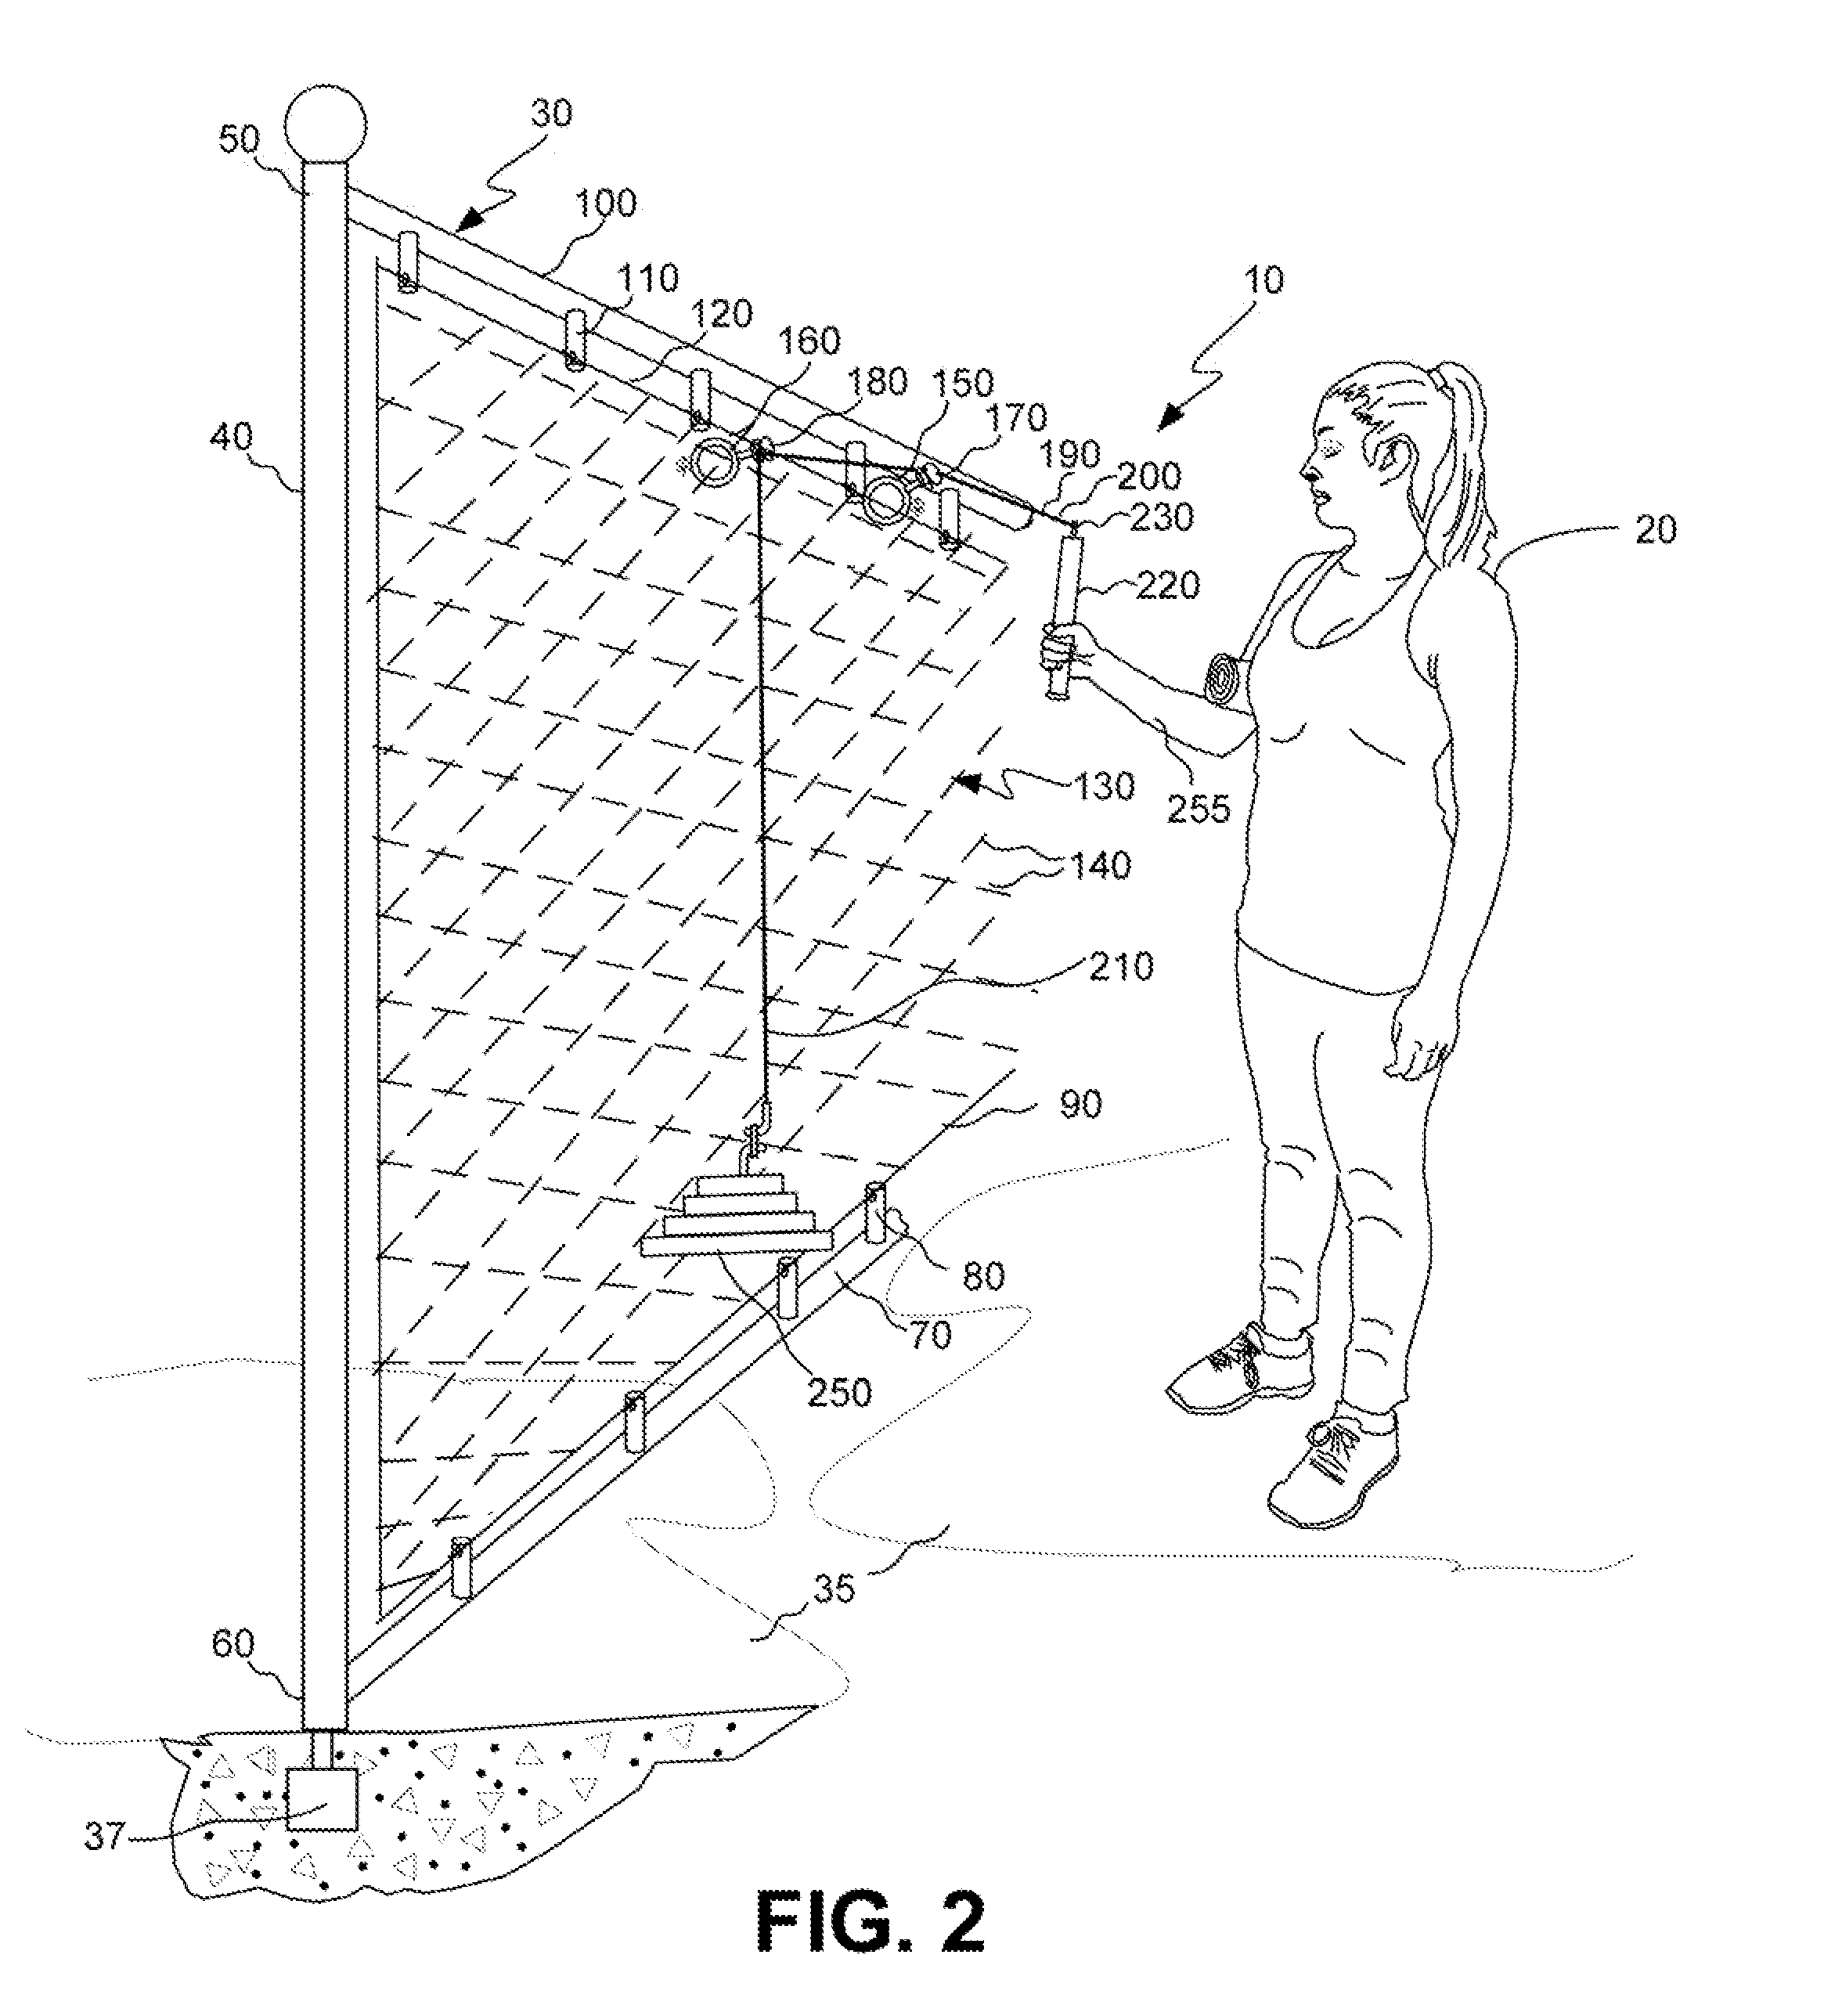 In-field kits and systems for self-directed theraputic pulley-based muscle rehabiliation methods